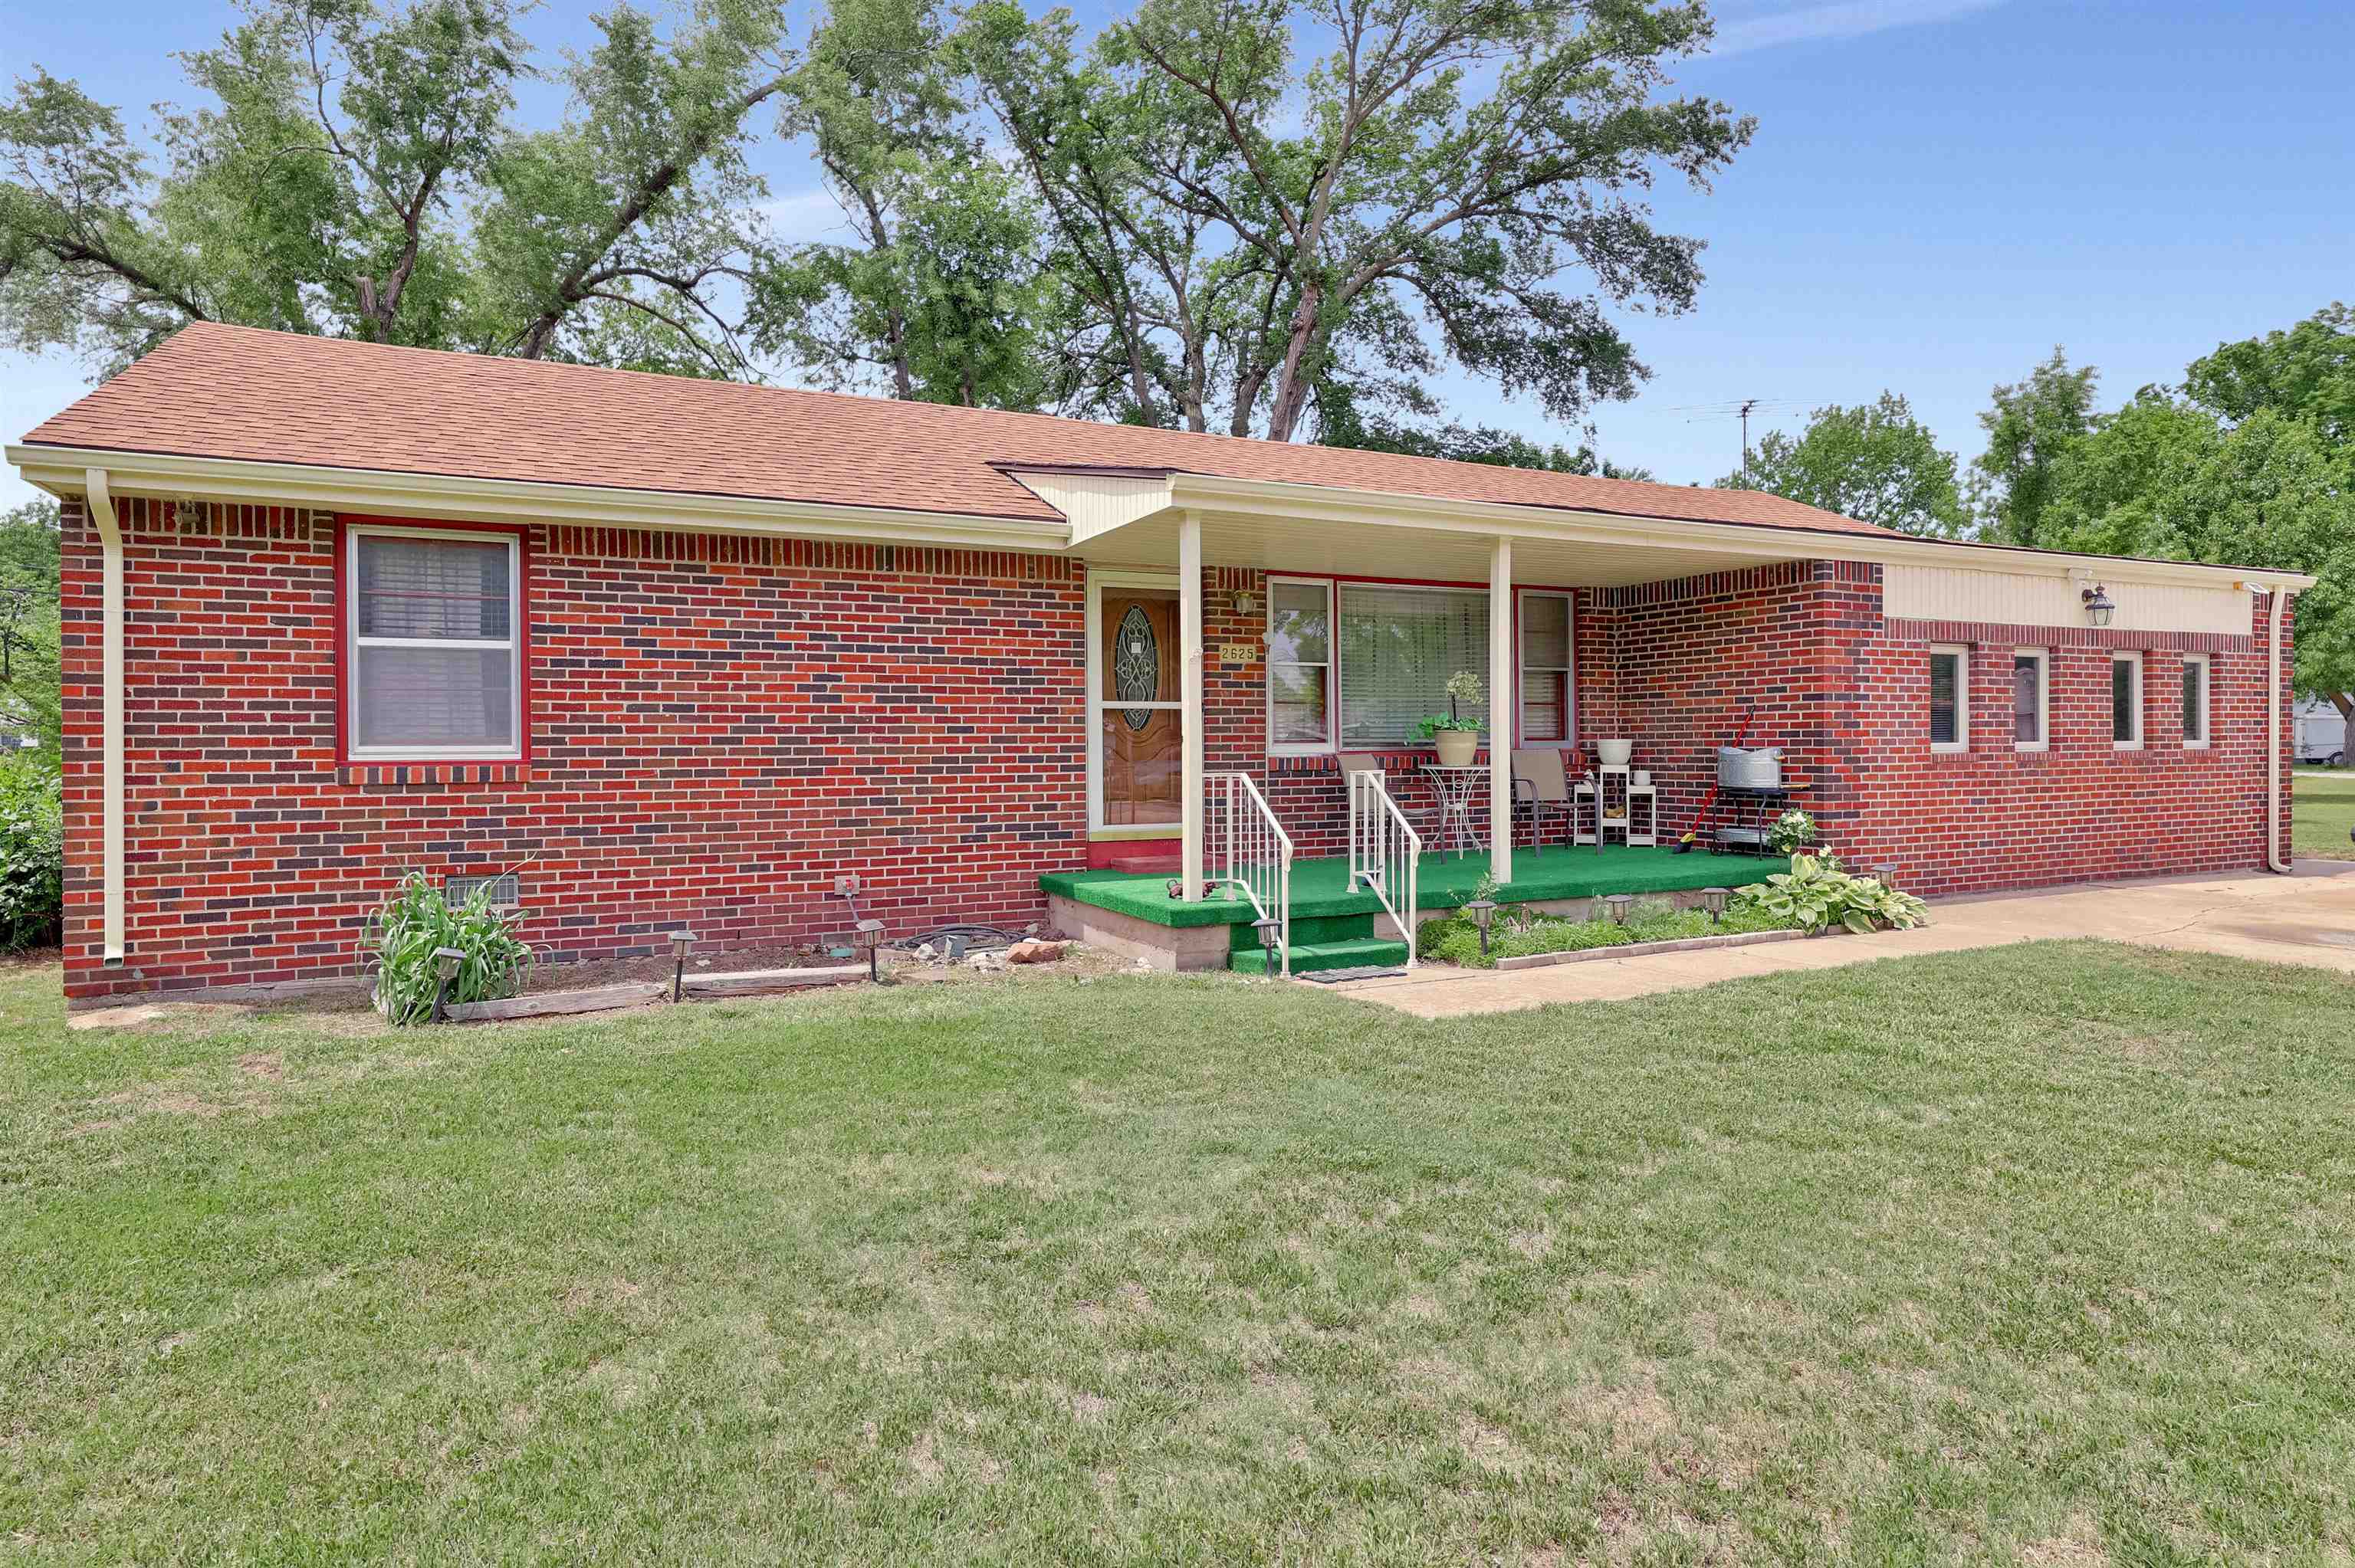 Well cared for, all brick home, sitting on over half an acre! You will love the quiet neighborhood a